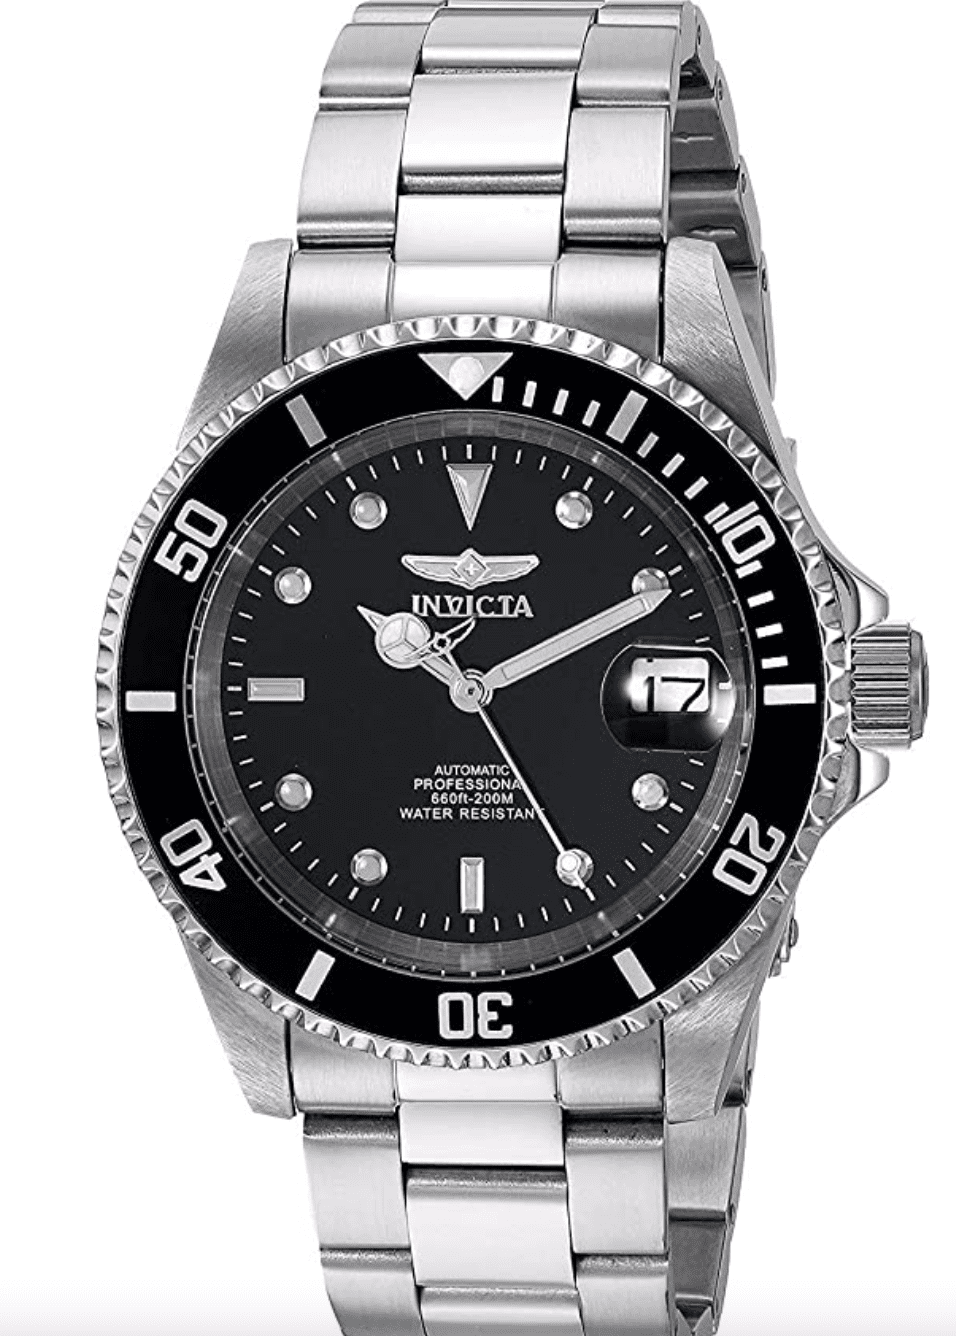 Invicta Automatic Pro Diver Stainless Steel Watch Review